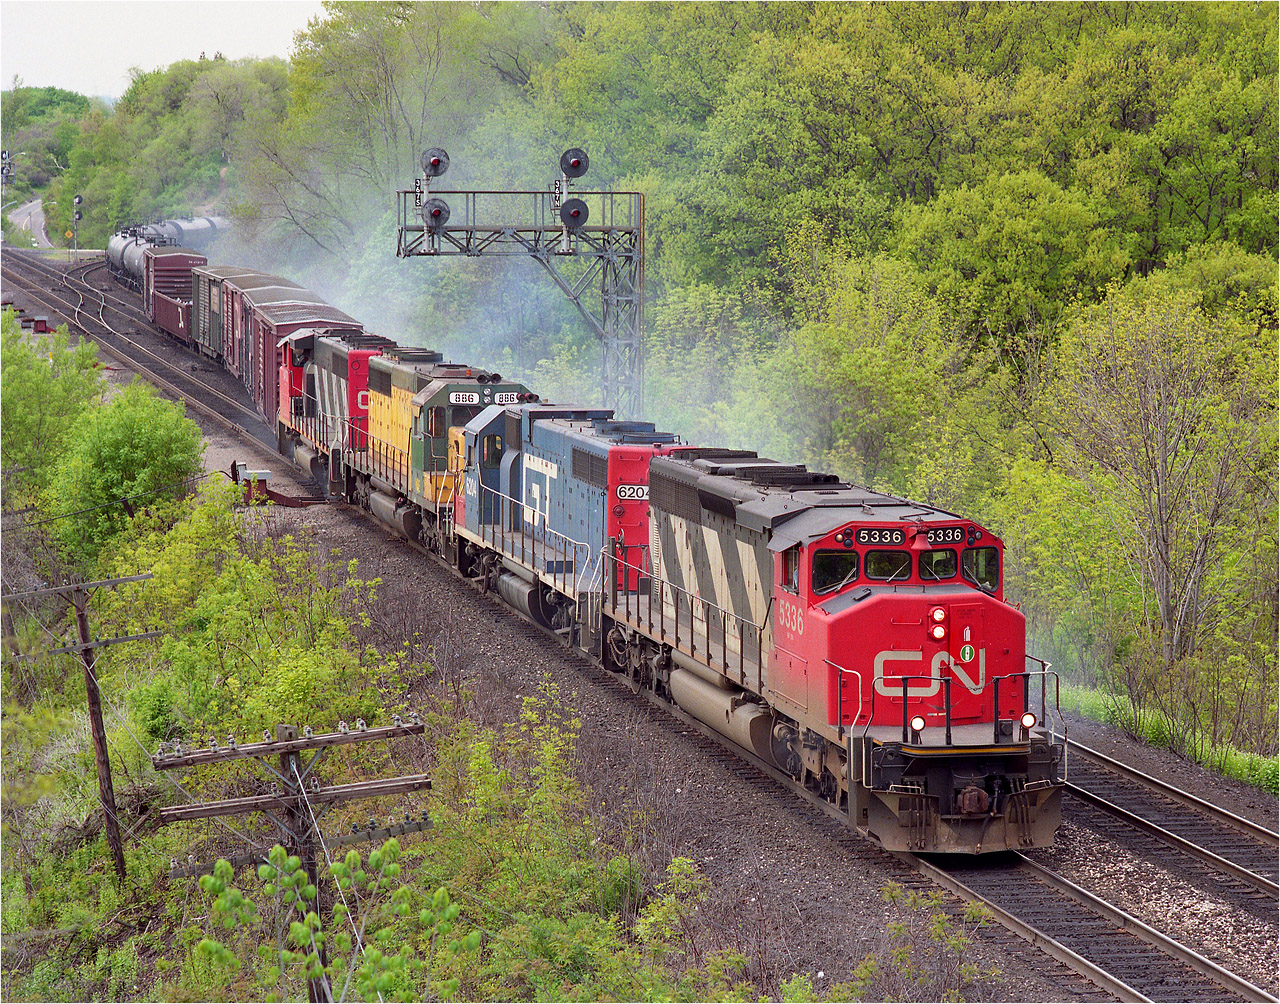 In this view from the railfan's walkbridge (as we call it)CN's #382 is smoking up pretty good, this due to overheating sticky overheating brakes, I assume, as it is a long downhill grade from Copetown to Bayview. A 'smokey train' was once common here, before roller bearings became common in the 1970s, and hotbox detectors came into existence. Power on this train: CN 5336, GT 6204, NRE(National Railway Equipment) 886 and CN 9410.